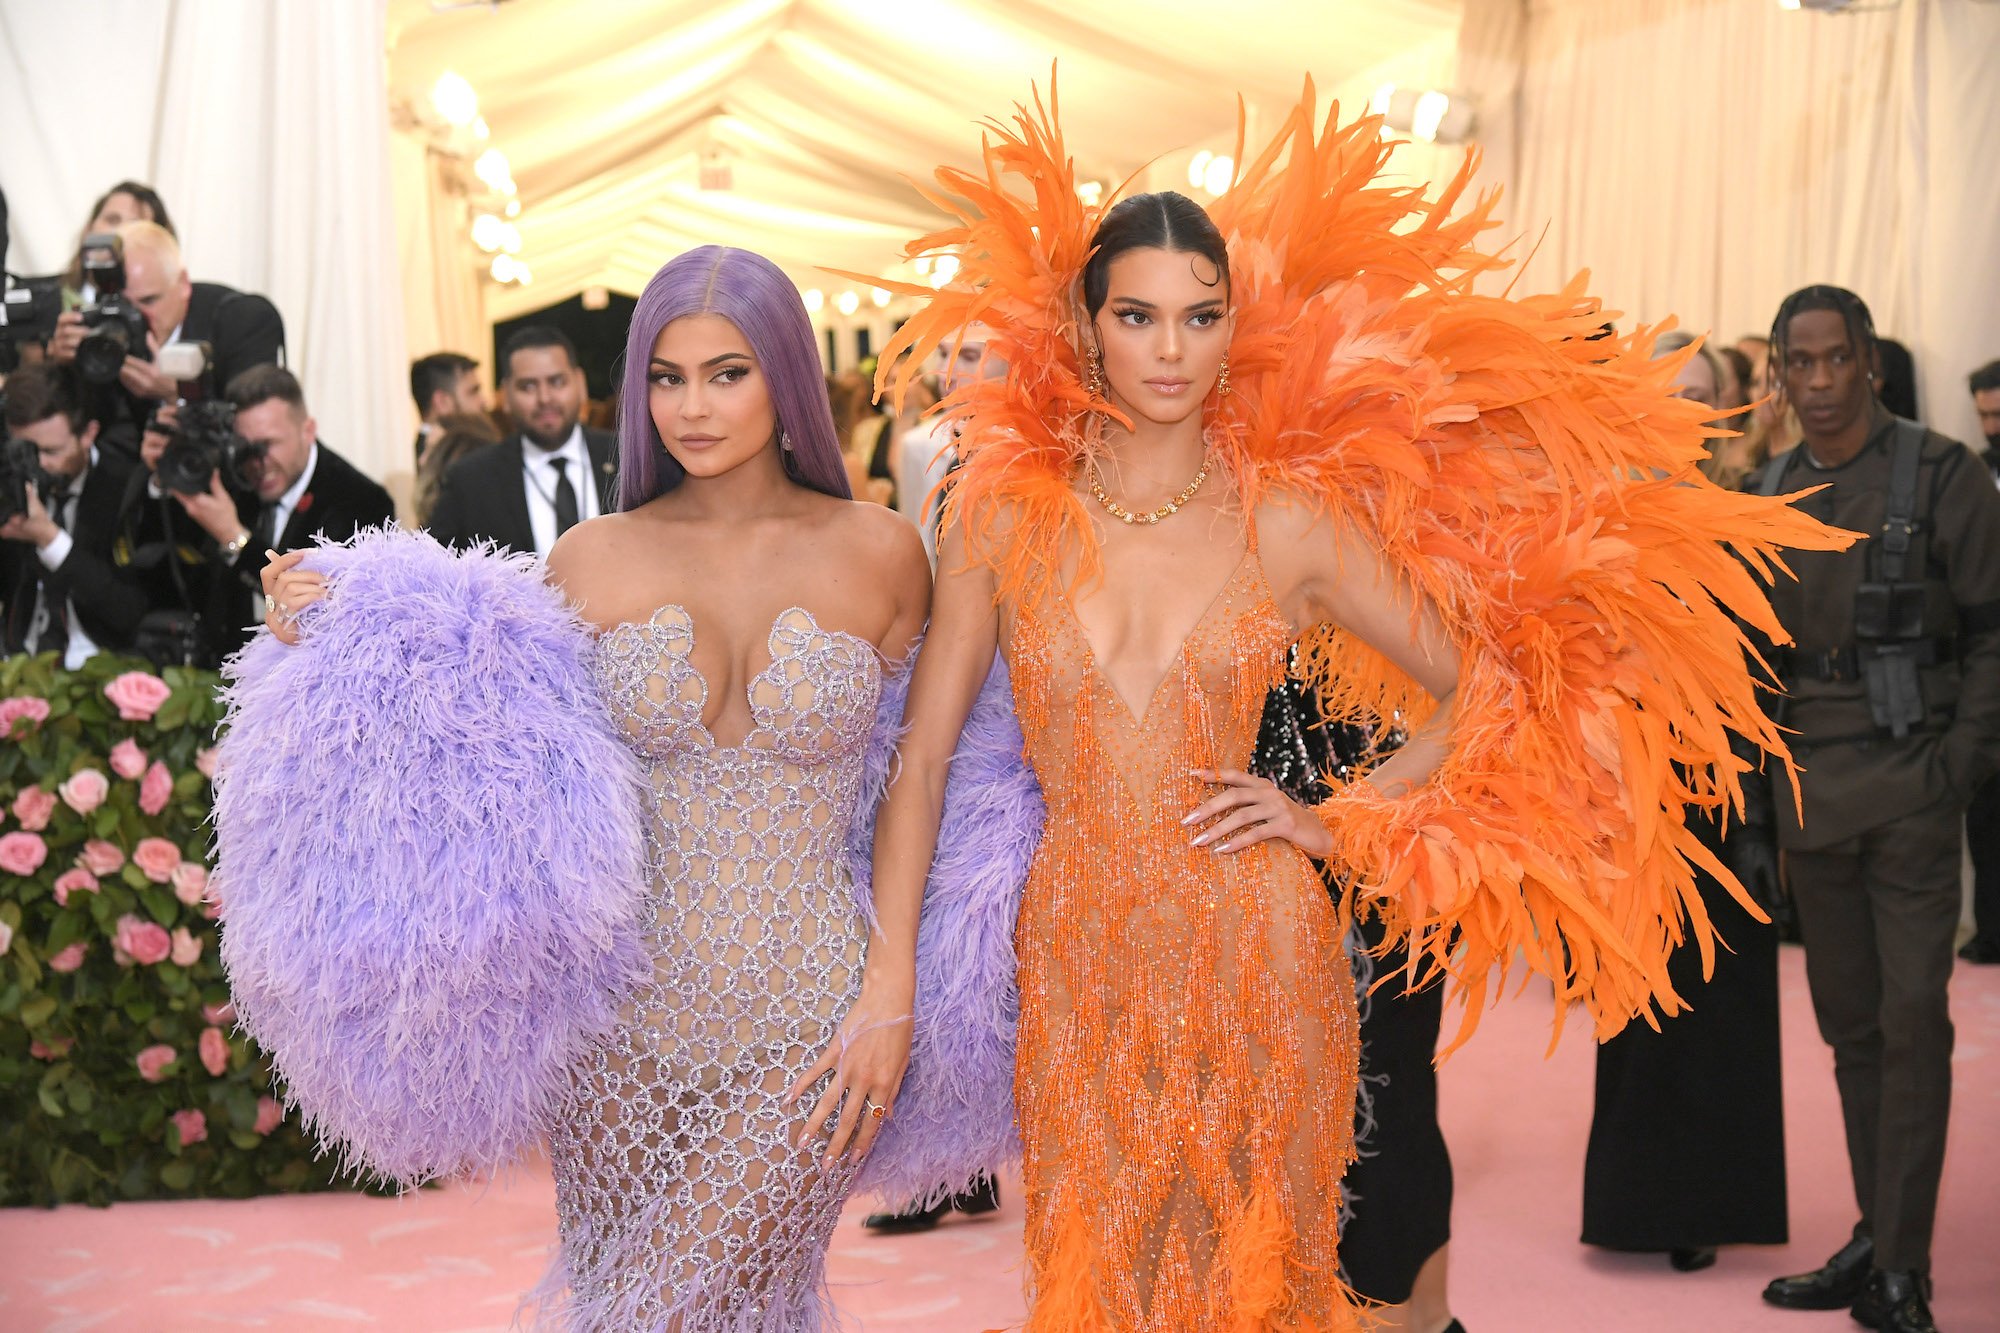 Kylie Jenner and Kendall Jenner looking to the right, wearing purple and orange respectively